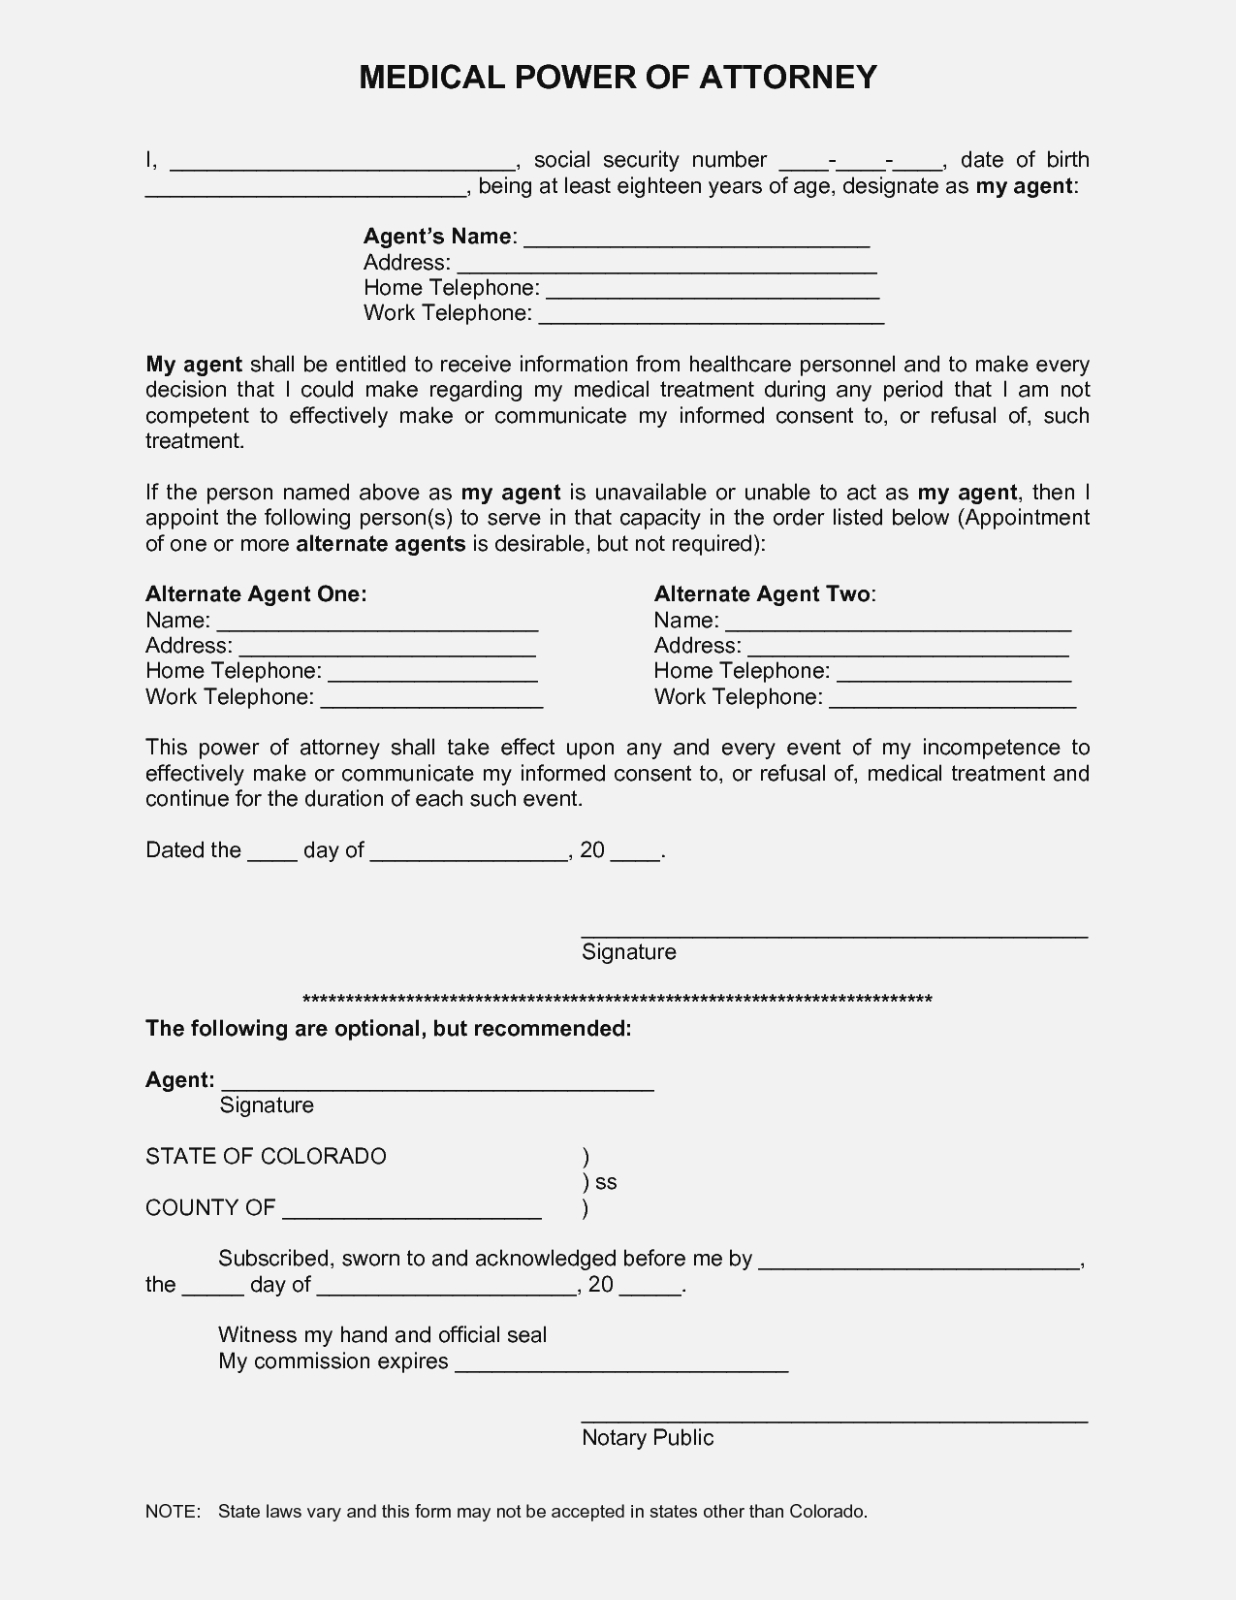 The Latest Trend In Online | The Invoice And Form Template - Free Printable Power Of Attorney Forms Online